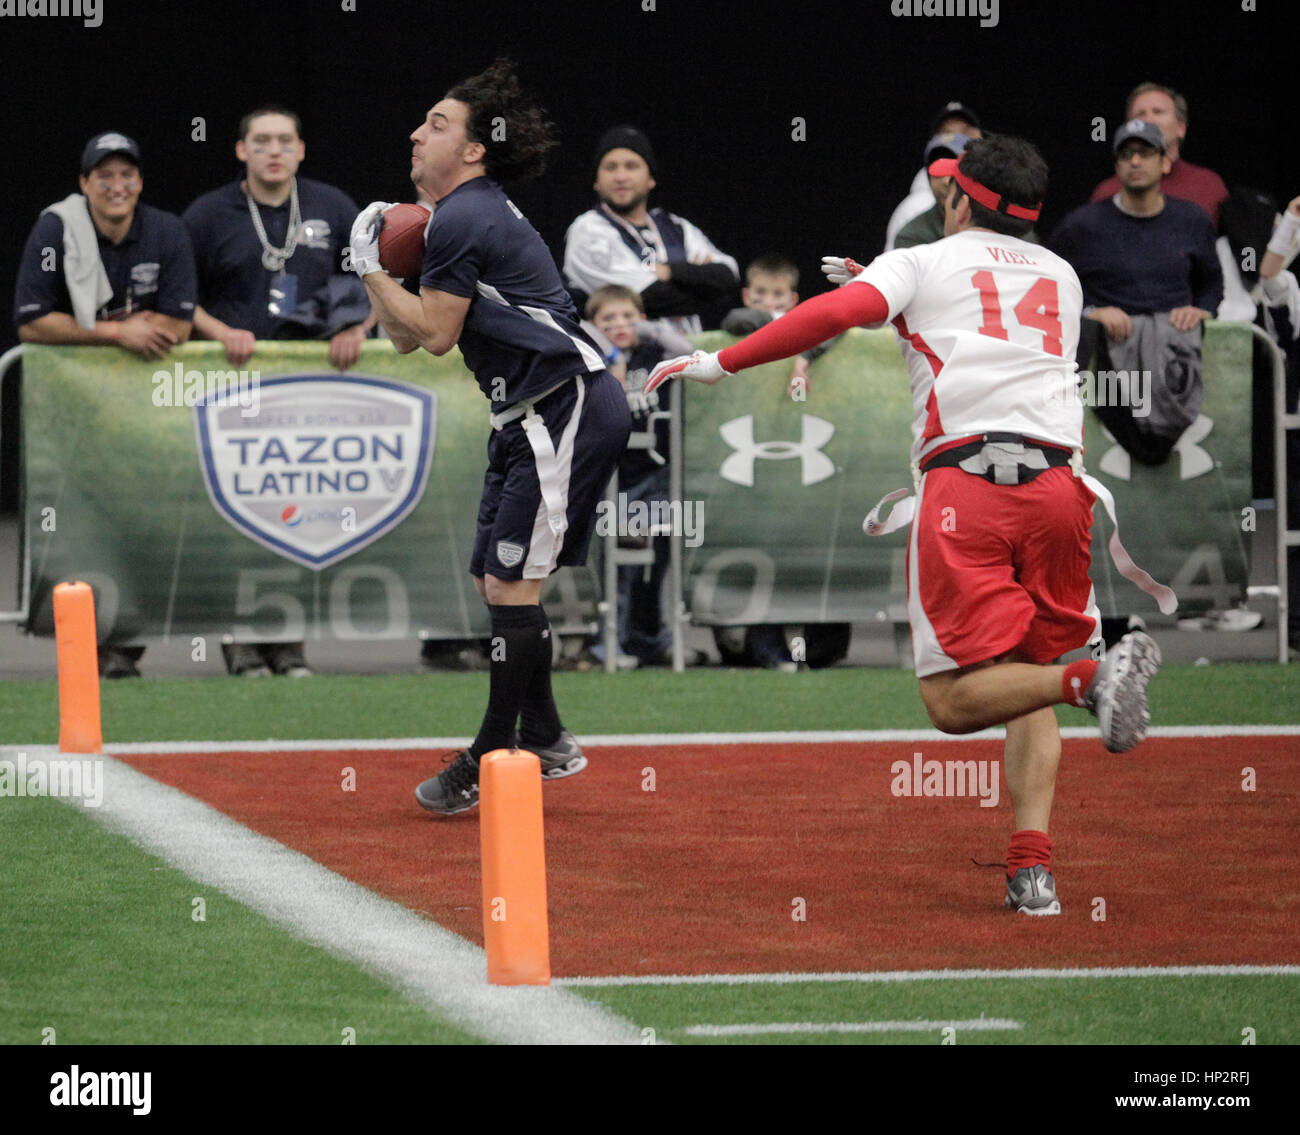 Martin Gramatica, left, scores a touch down over Felipe Viel at the Tazon Latino V flag football game at Super Bowl NFL Experience at the Dallas Convention Center on February 2, 2011 in Dallas, Texas. Photo by Francis Specker Stock Photo